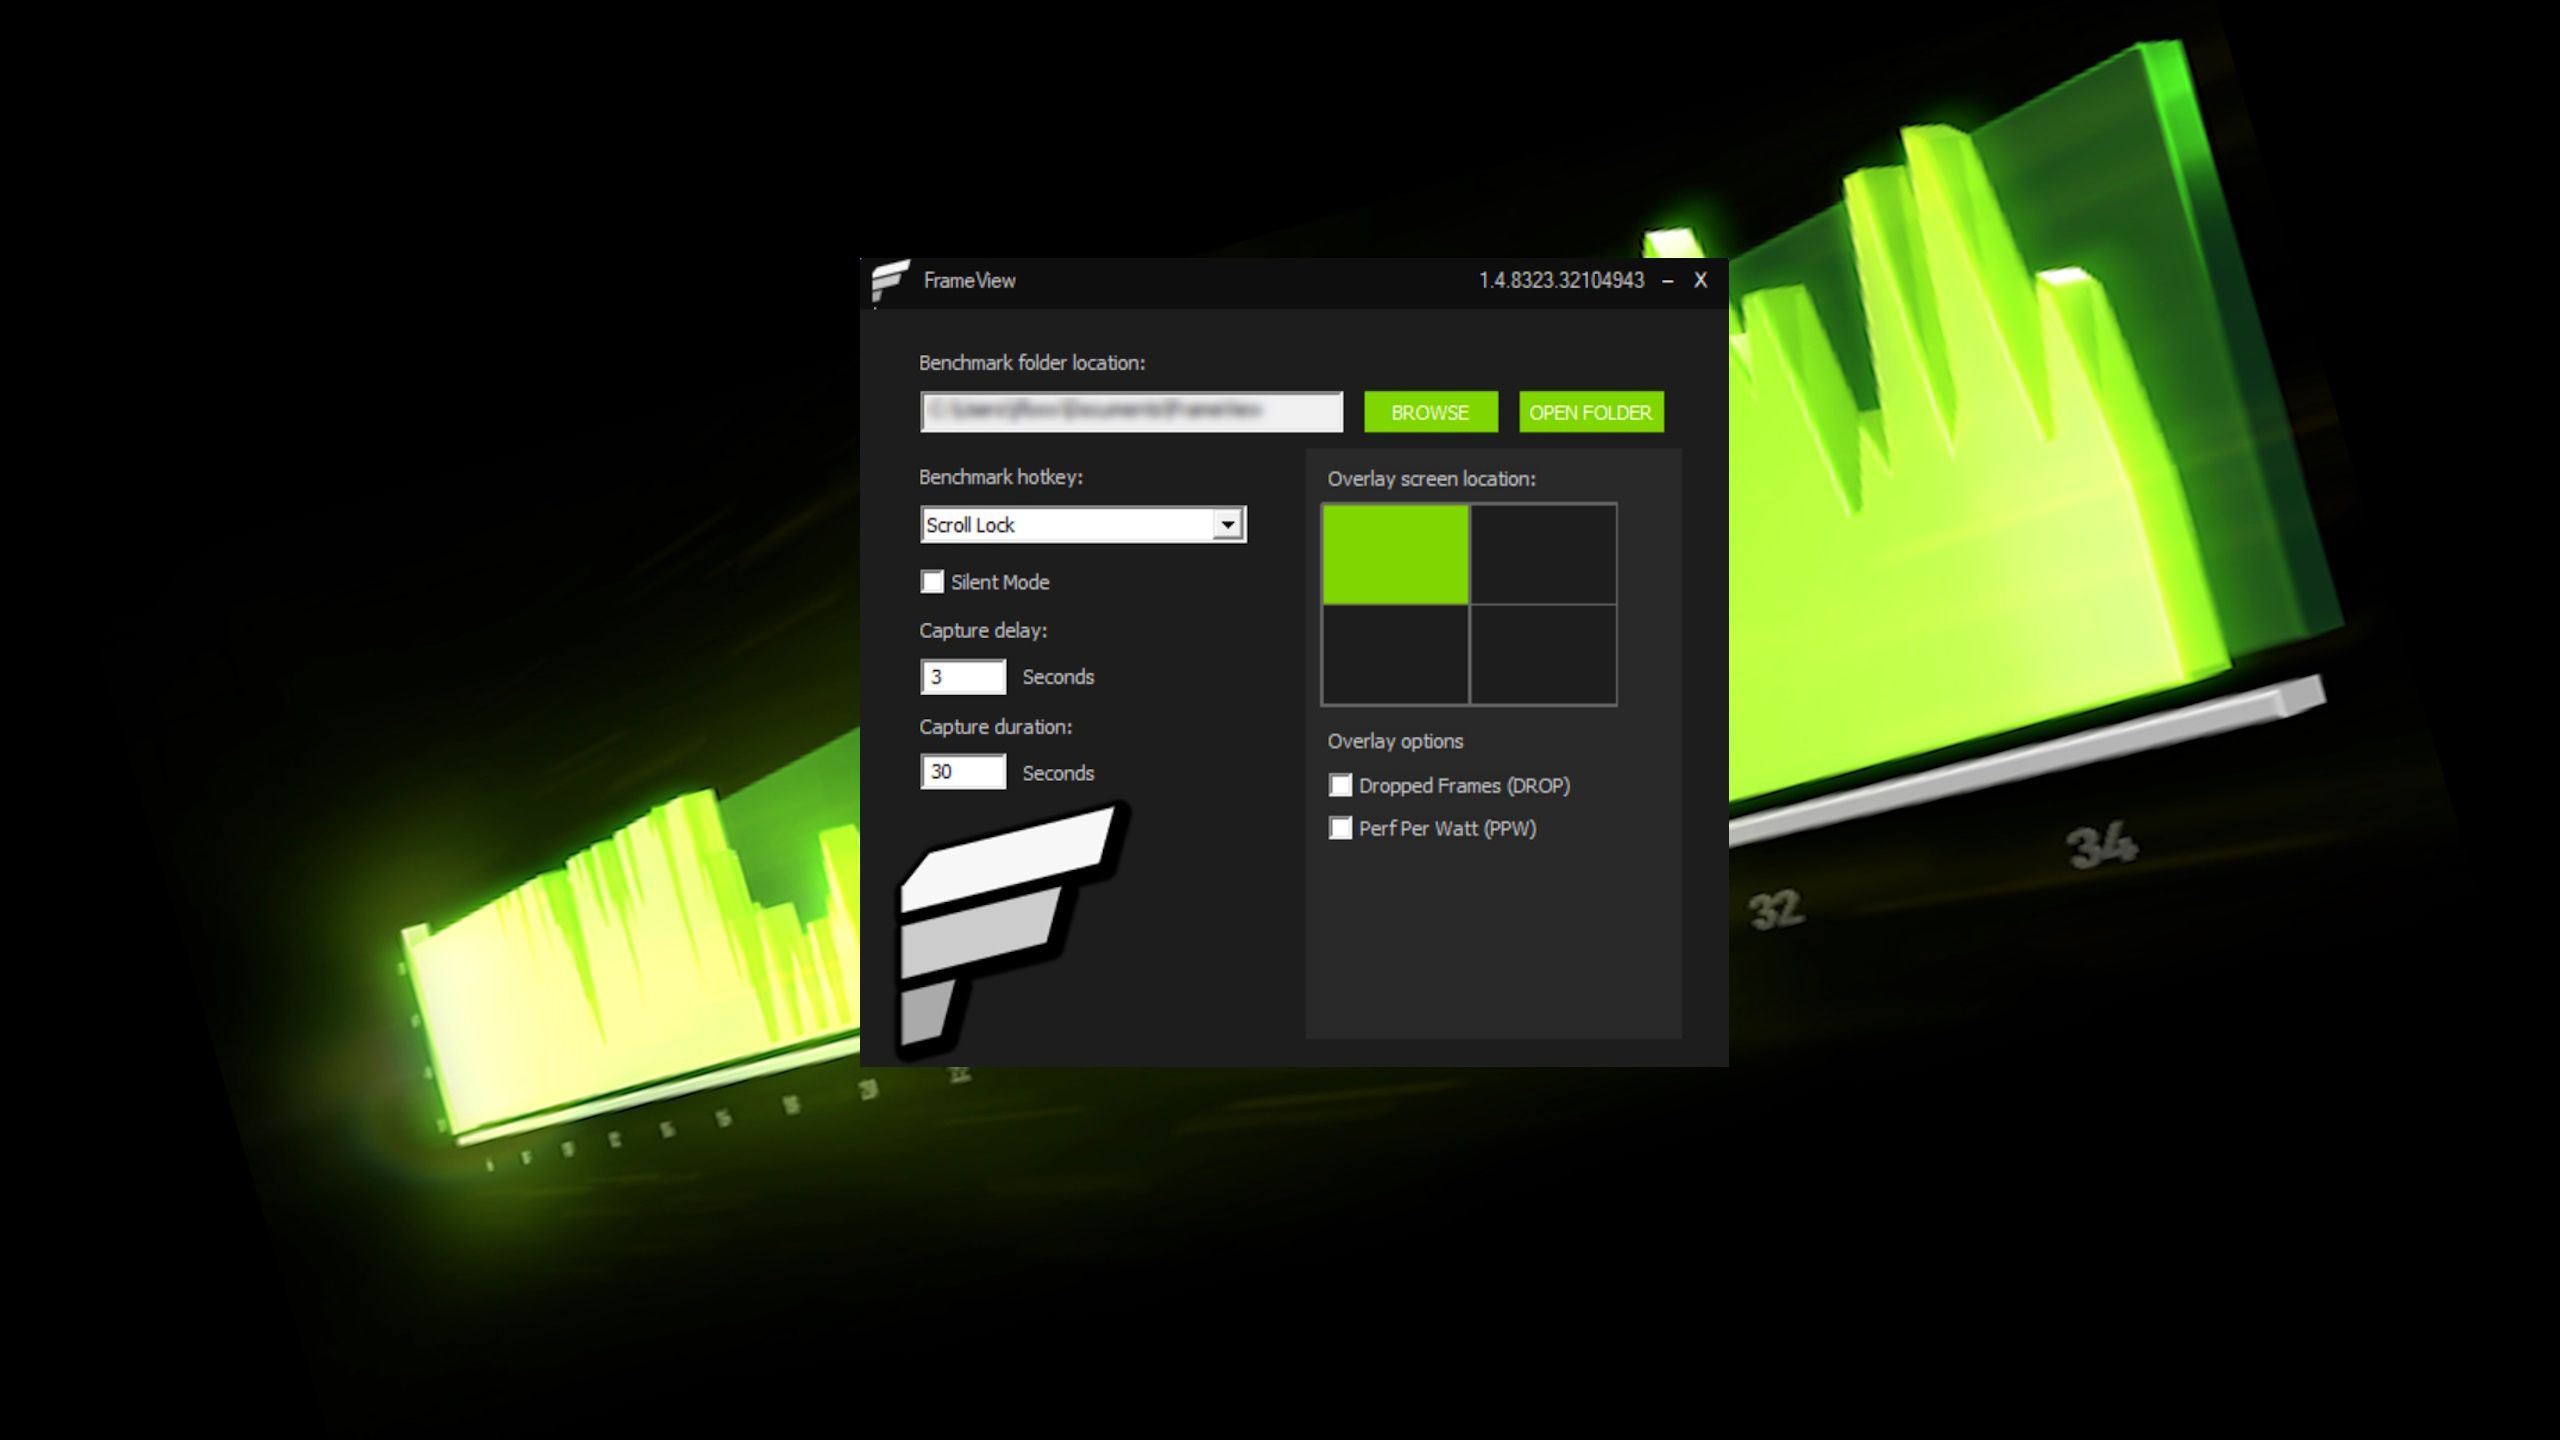 Nvidia FrameView framerate monitoring and recording tool